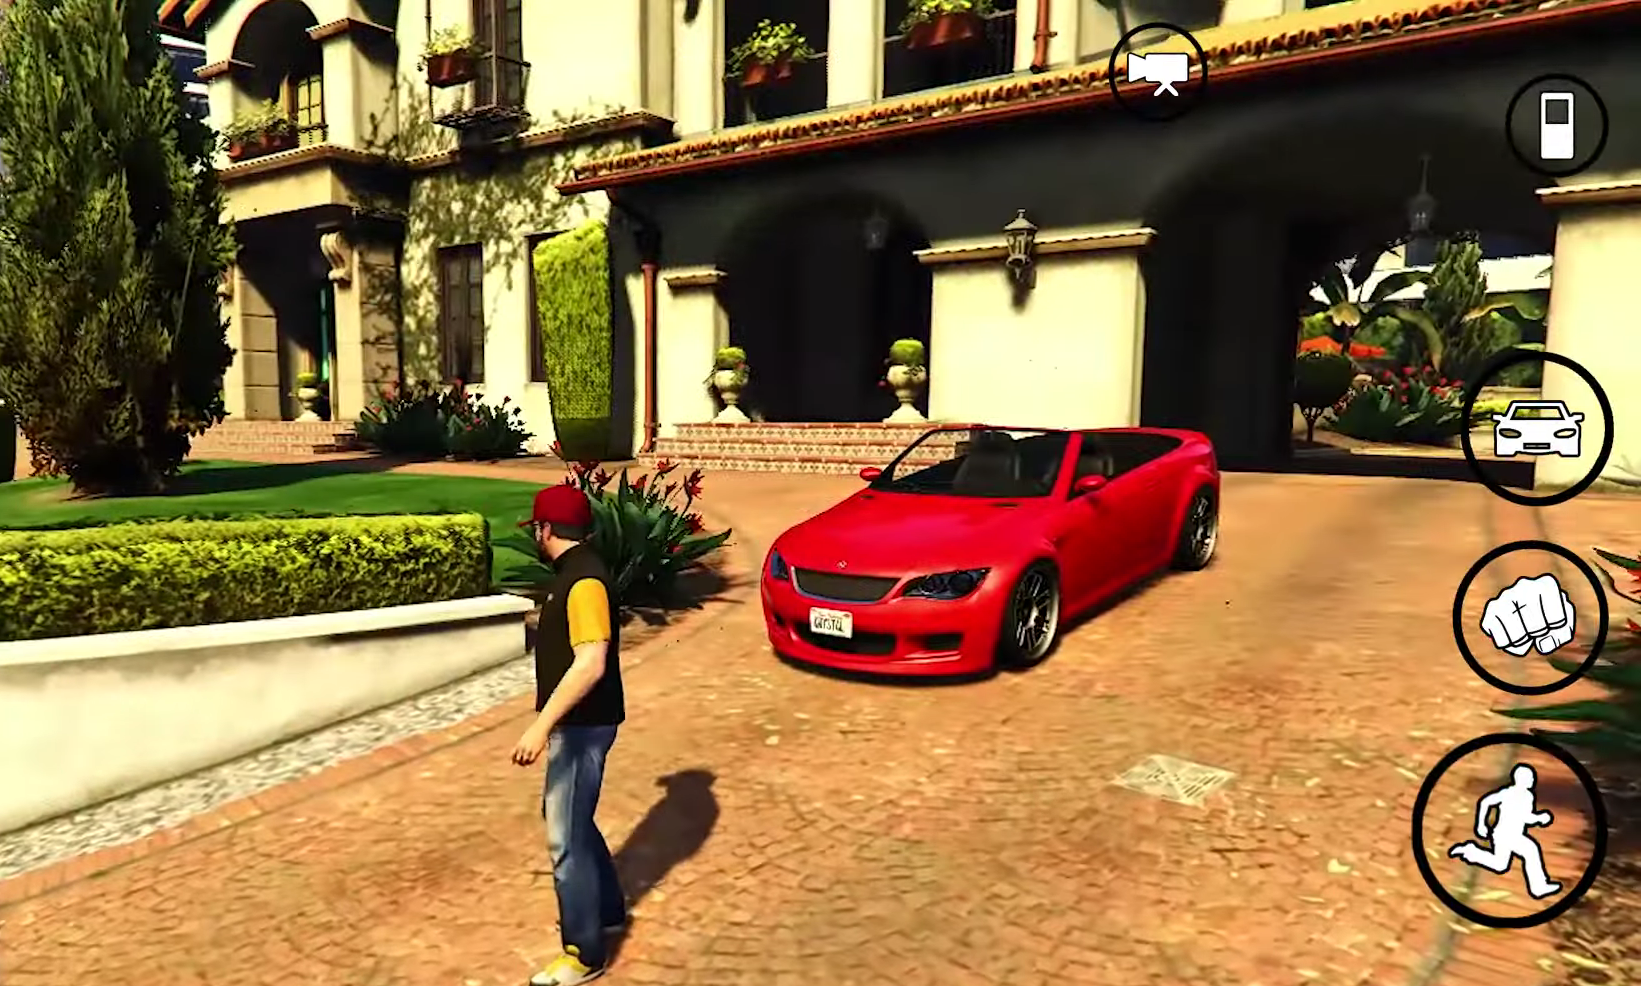 Download Grand Theft Auto 5 Mobile Version - Full Game